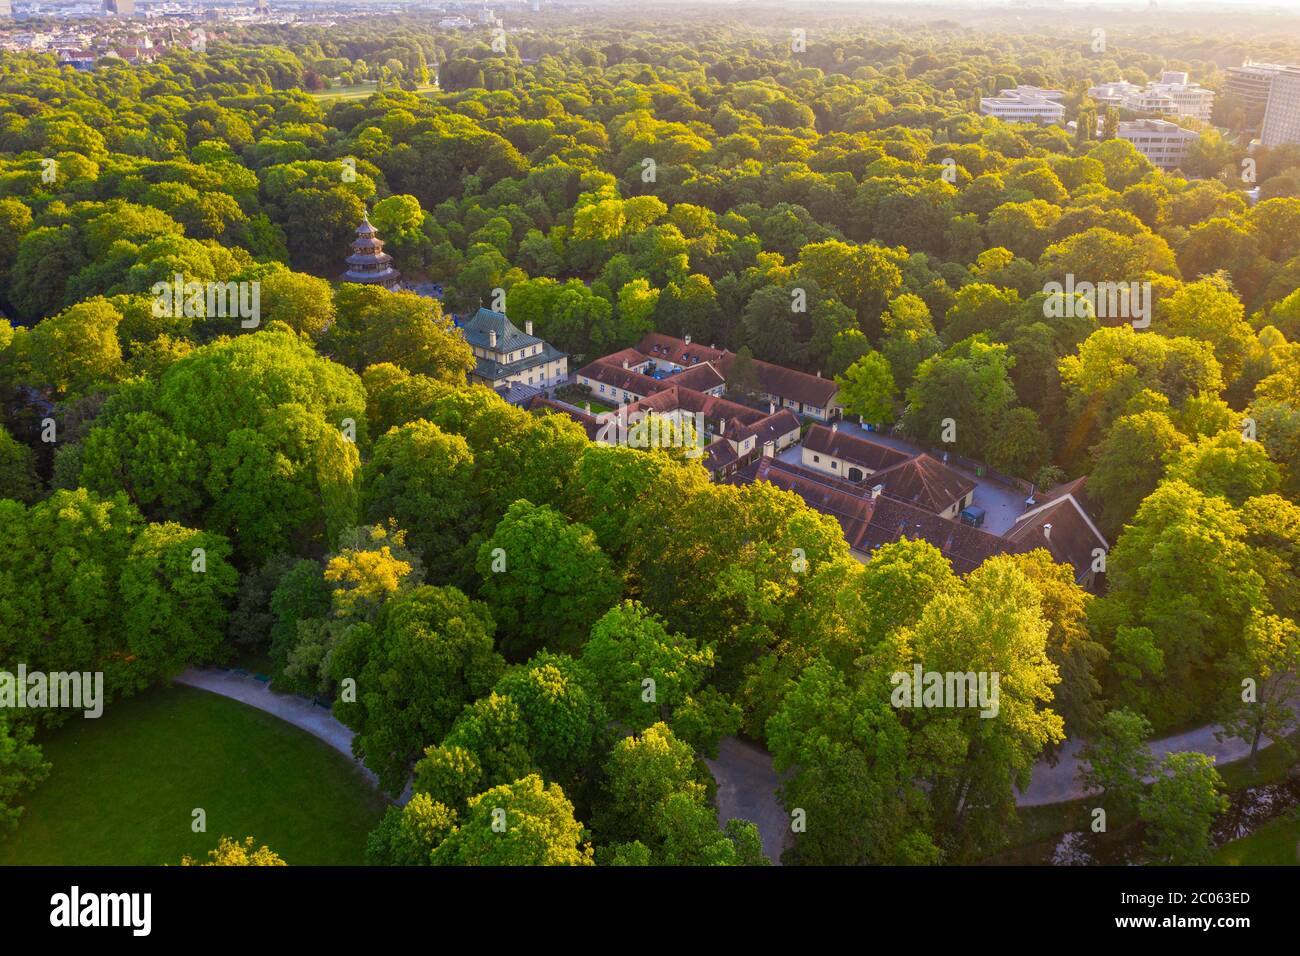 Chinese Tower and Economy Building, English Garden, Munich, aerial view, Upper Bavaria, Bavaria, Germany Stock Photo